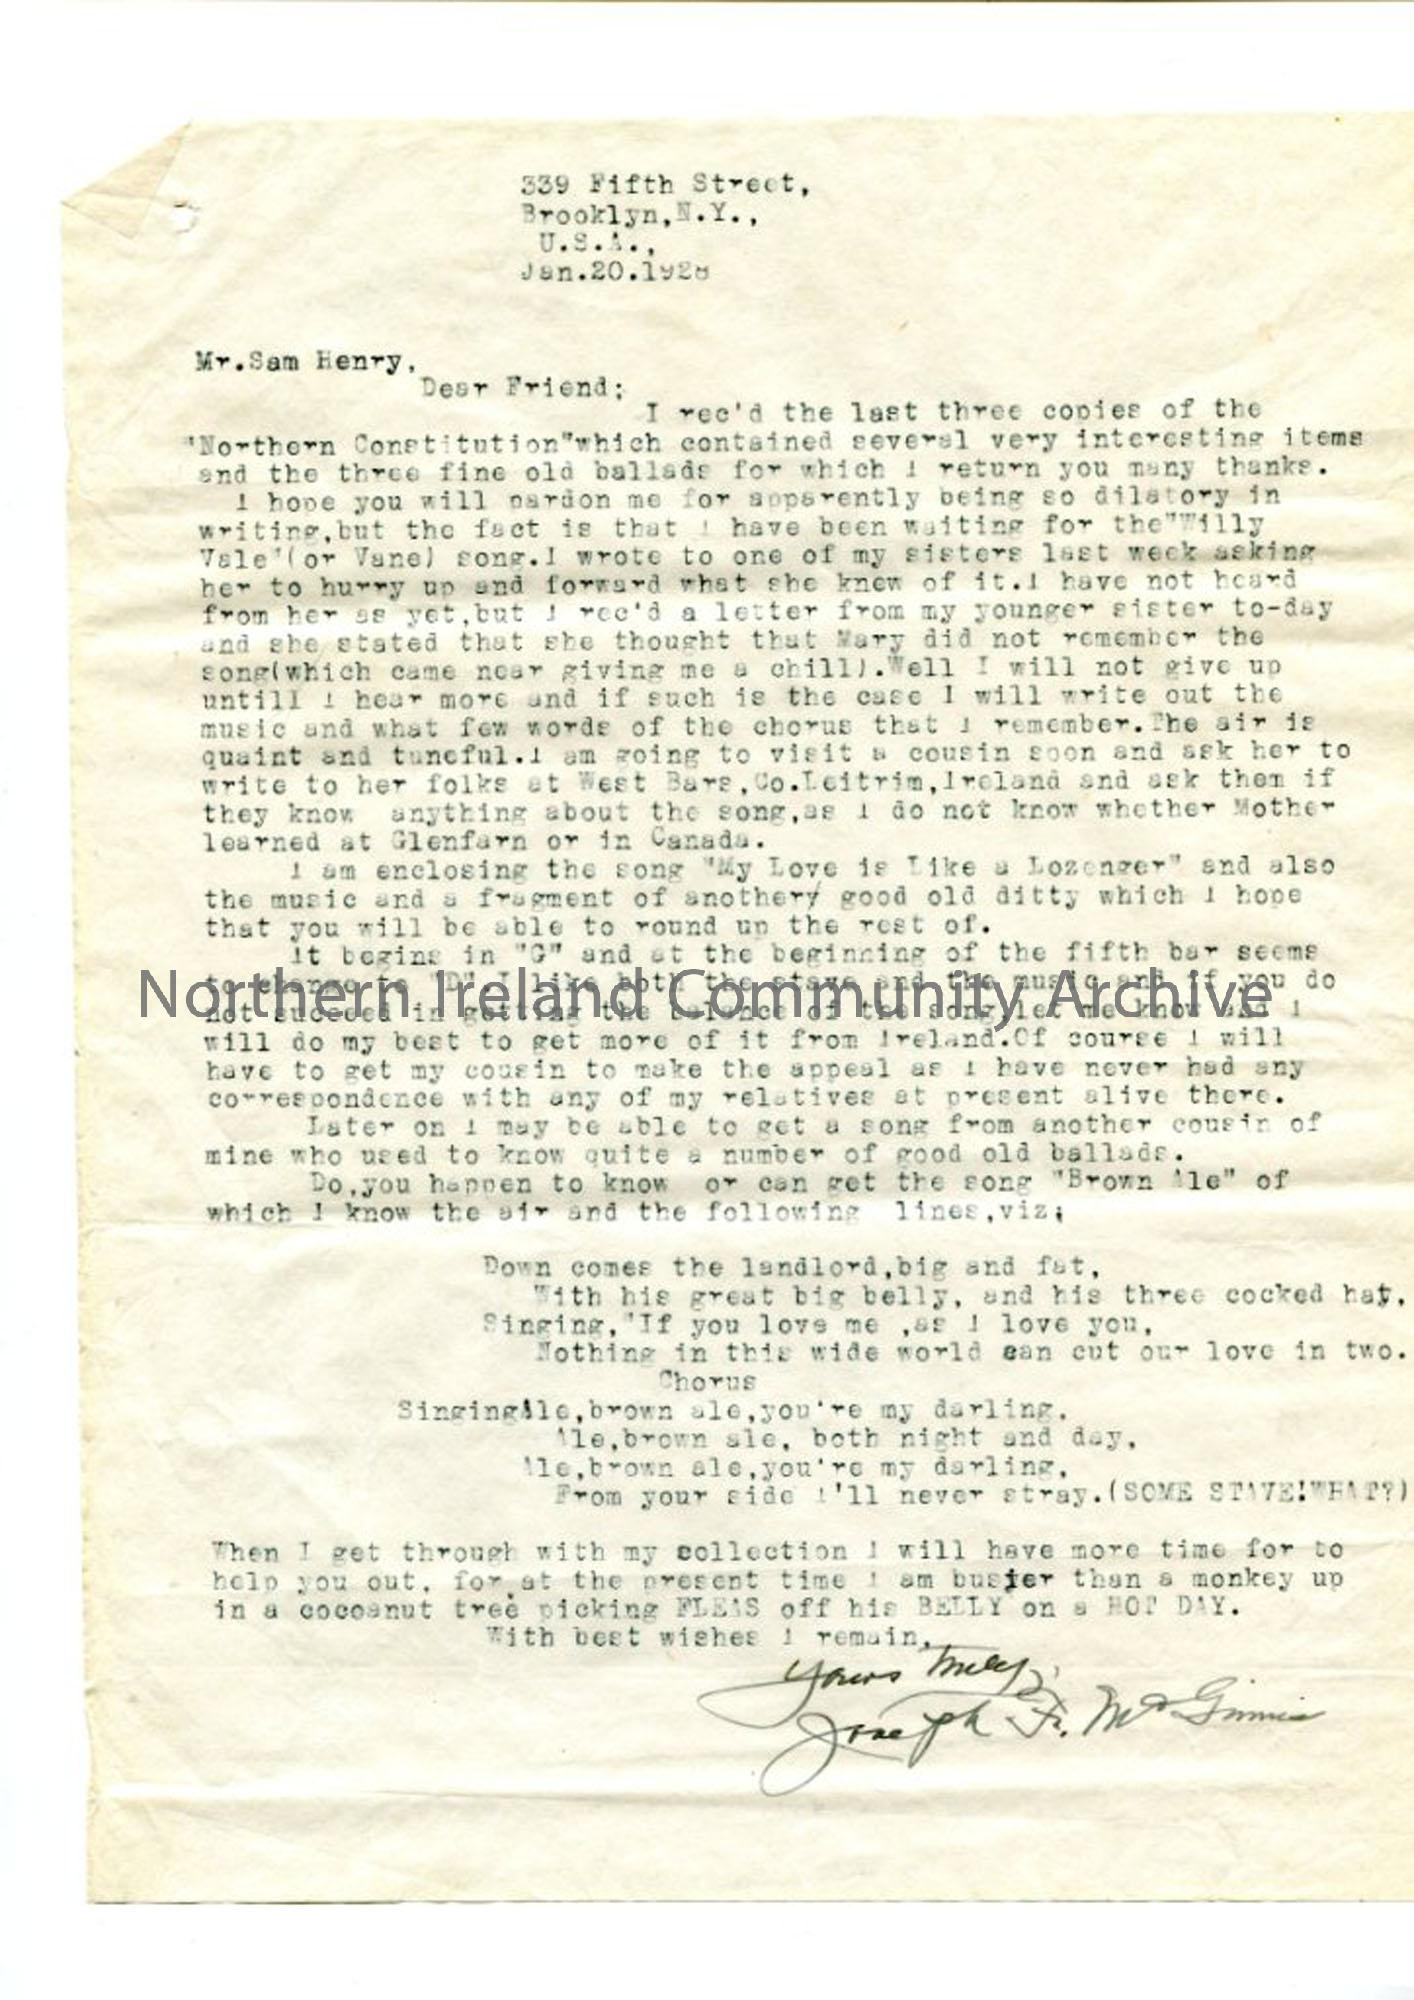 Letter from Joseph McGinnis, 20th January 1928